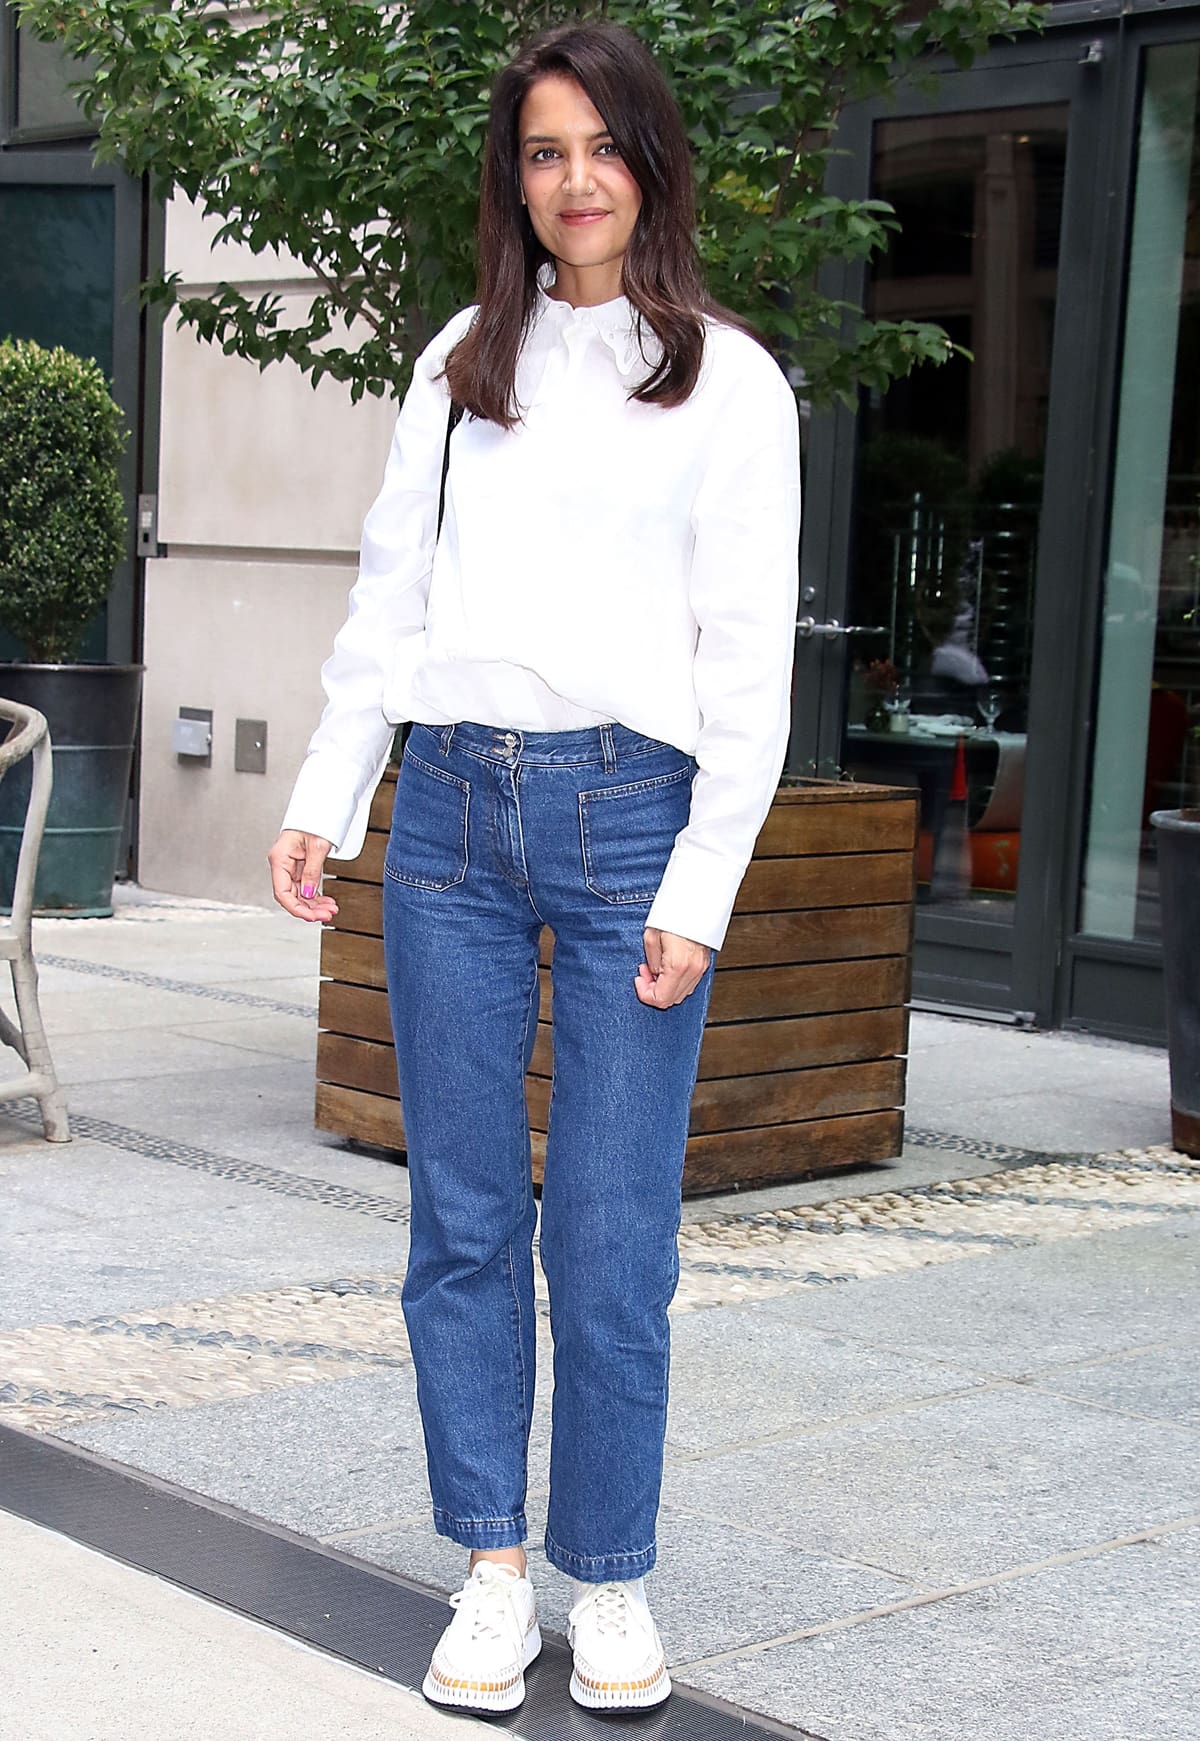 Katie Holmes wears blue jeans with a classic Chloé shirt that features romantic detail in the broderie anglaise collar